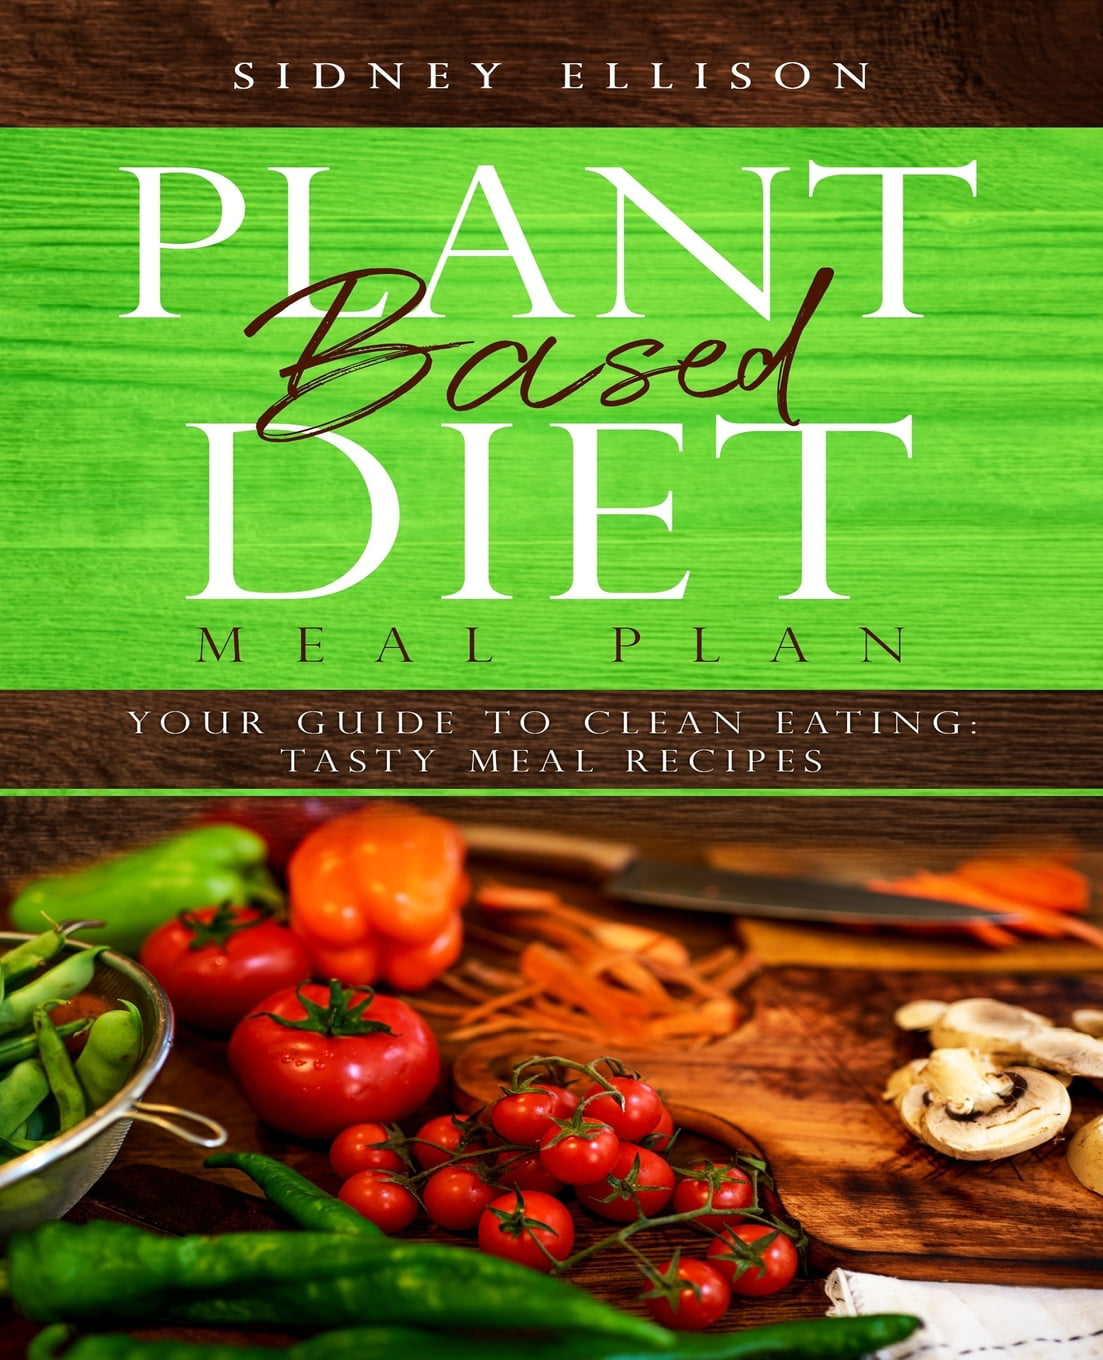 Plant Based Diet Meal Plan: Plant Based Diet Meal Plan : Your Guide to ...